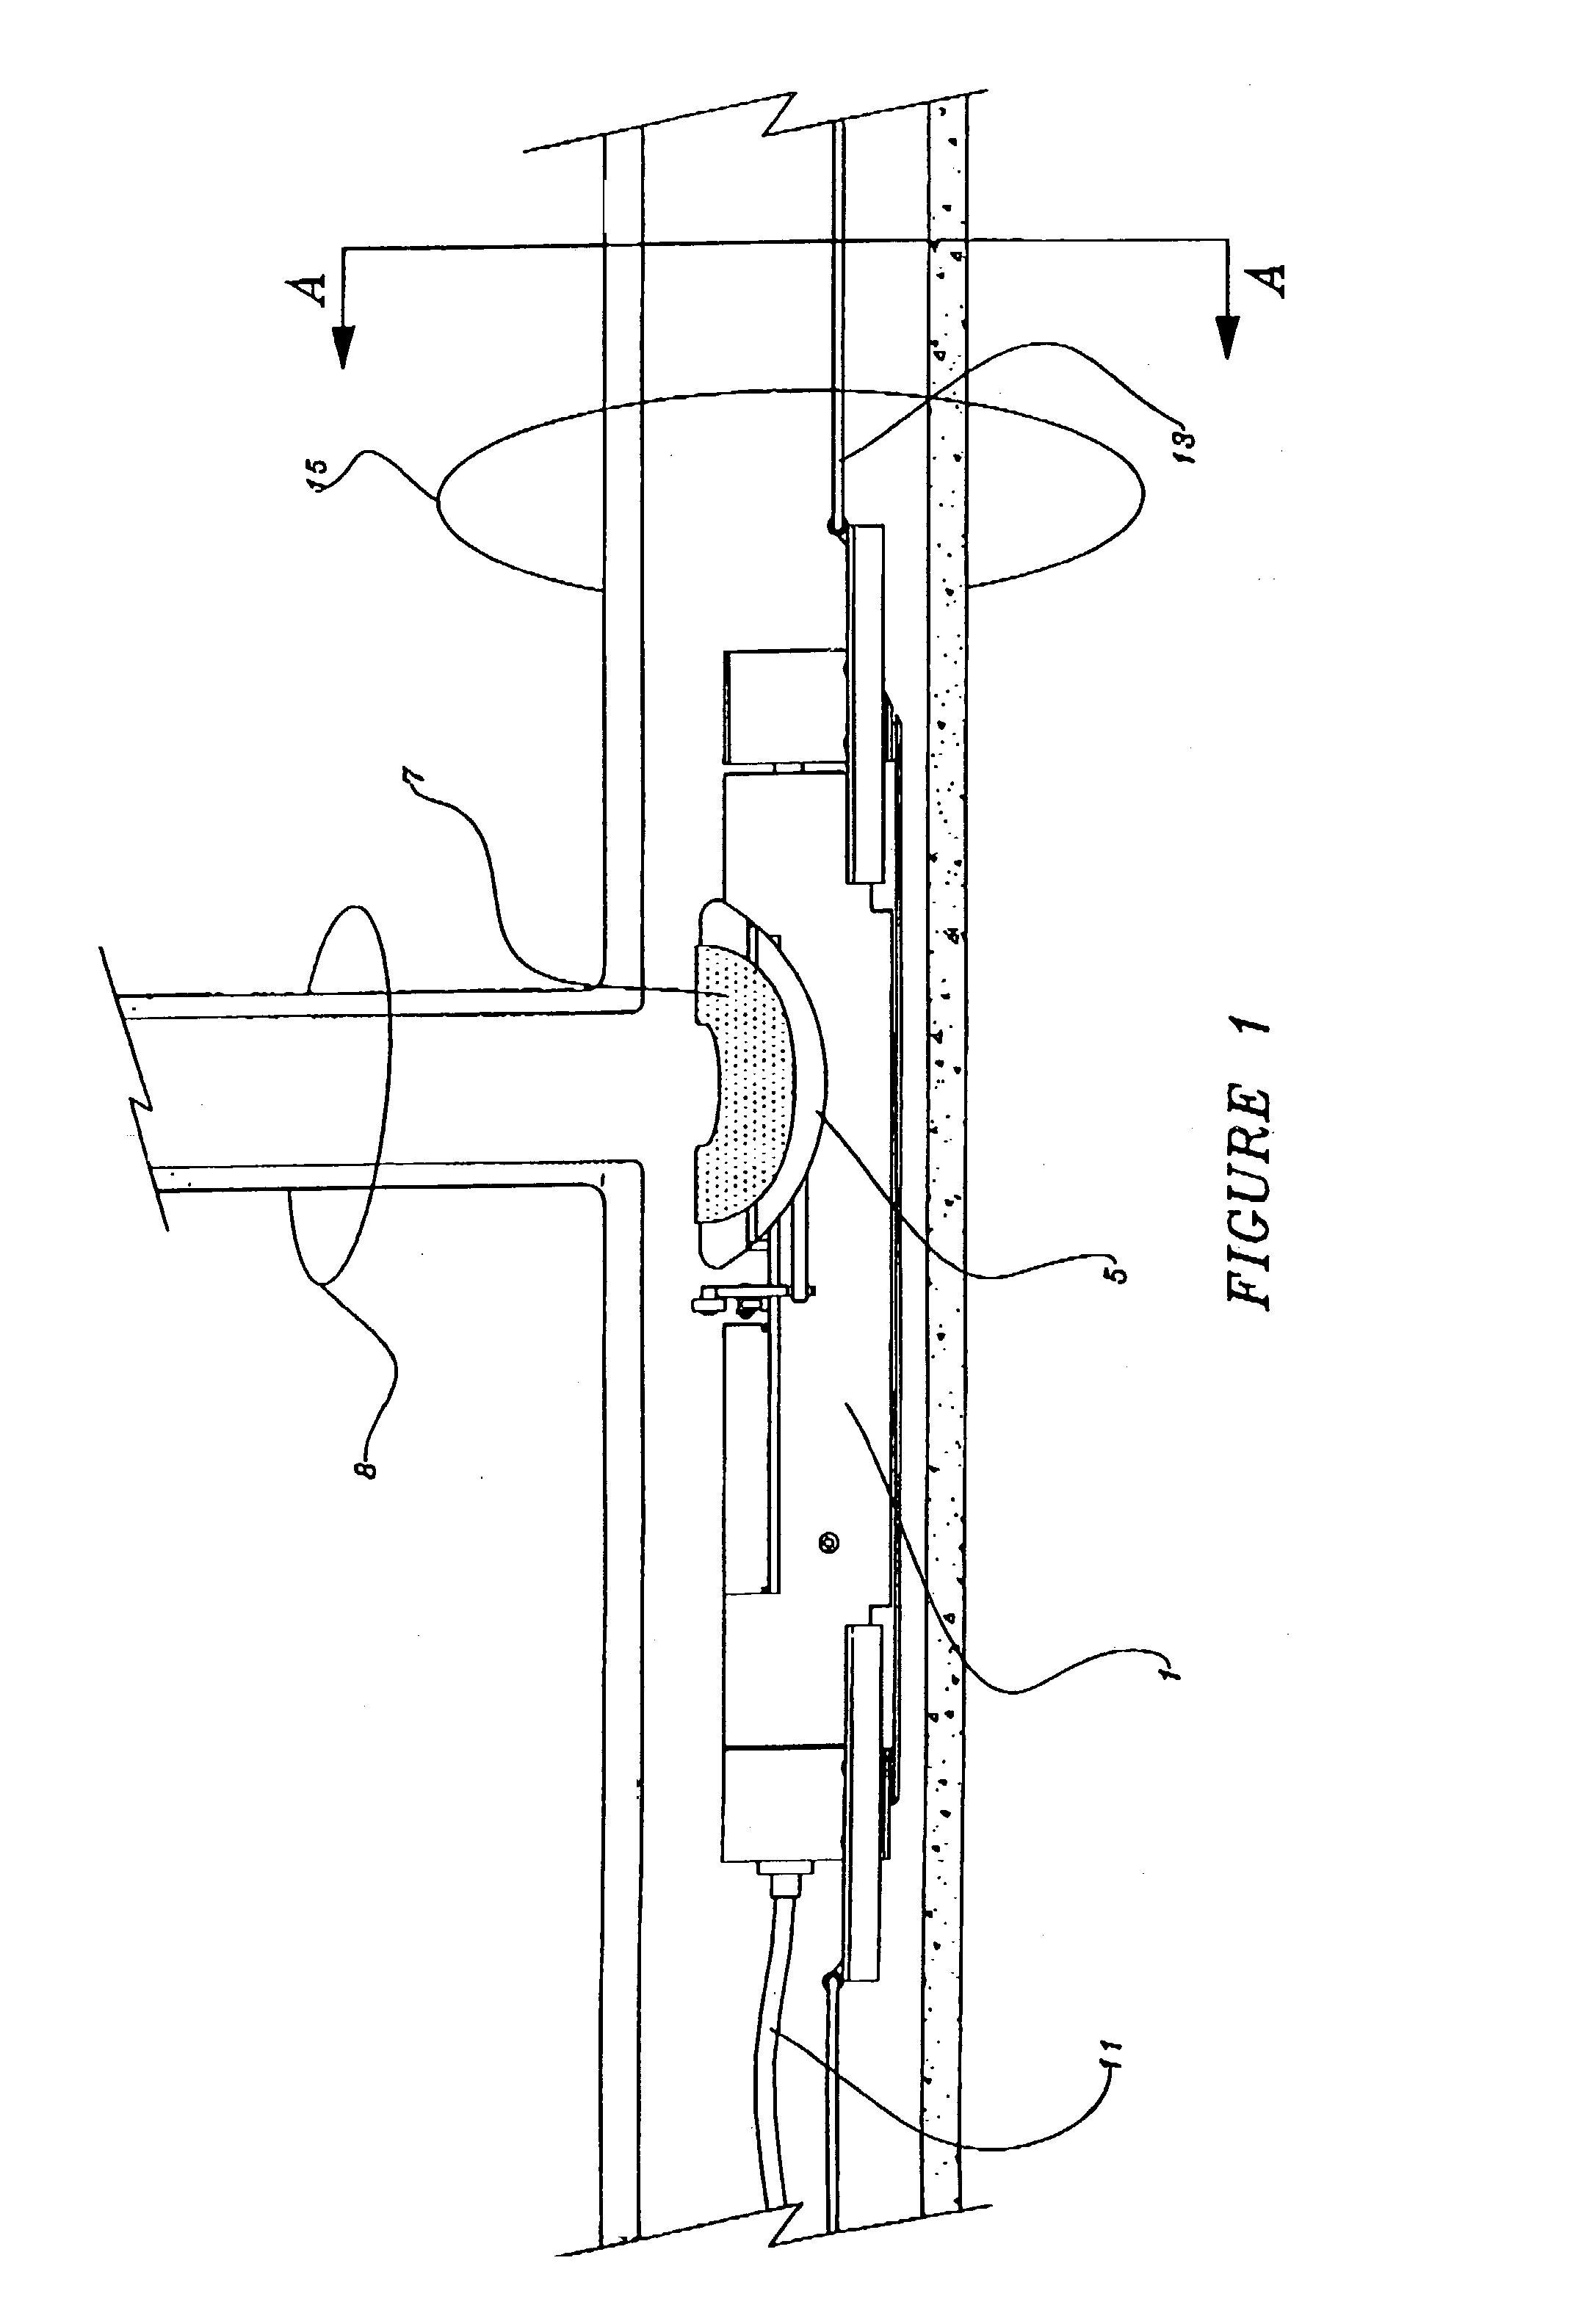 Apparatus, methods, and liners for repairing conduits